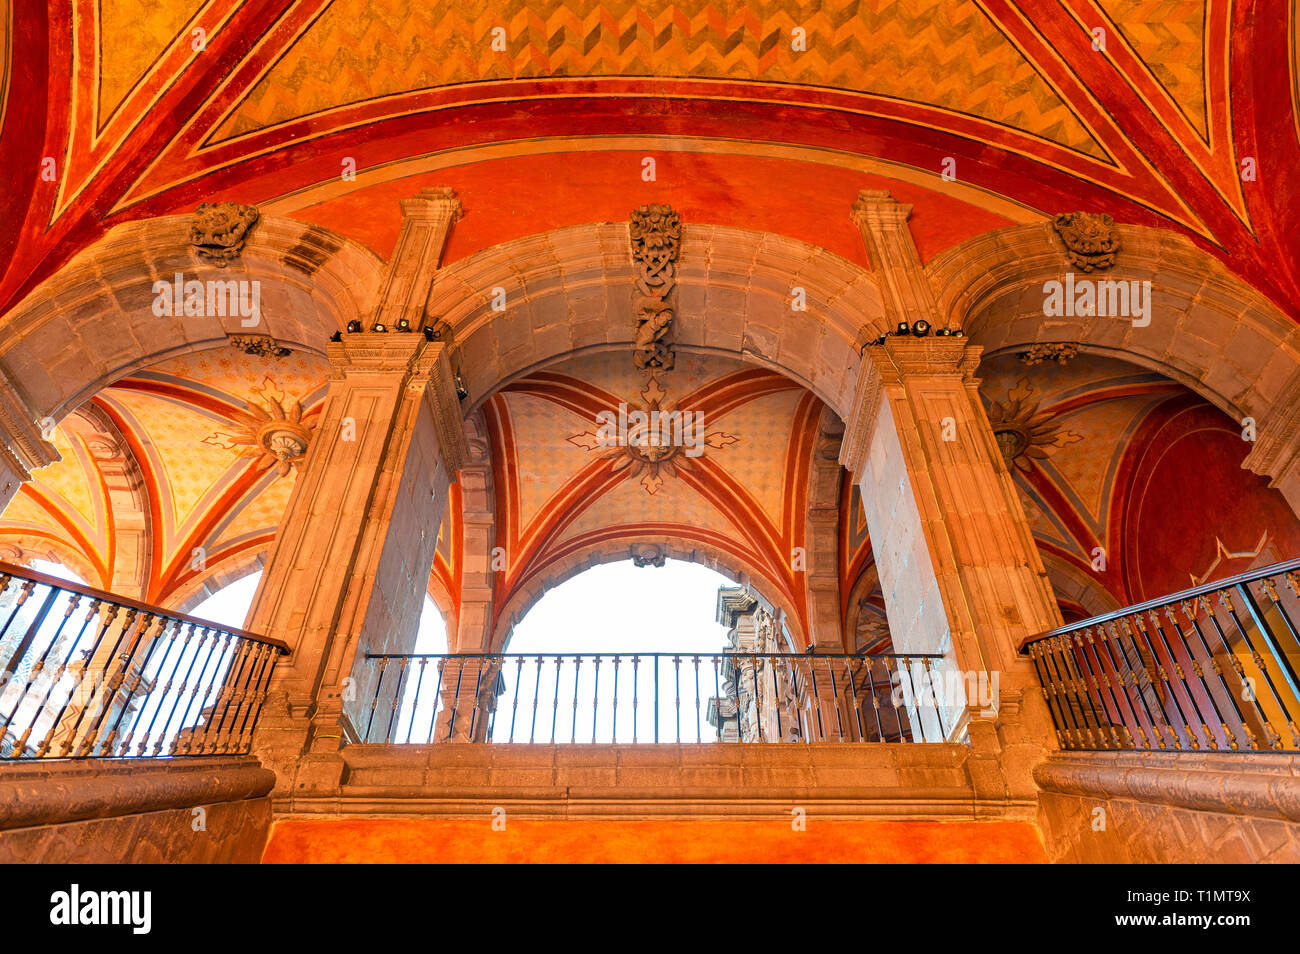 Colonial style architecture with arches and columns in the public area of the Art Museum of Queretaro City, Mexico. Stock Photo